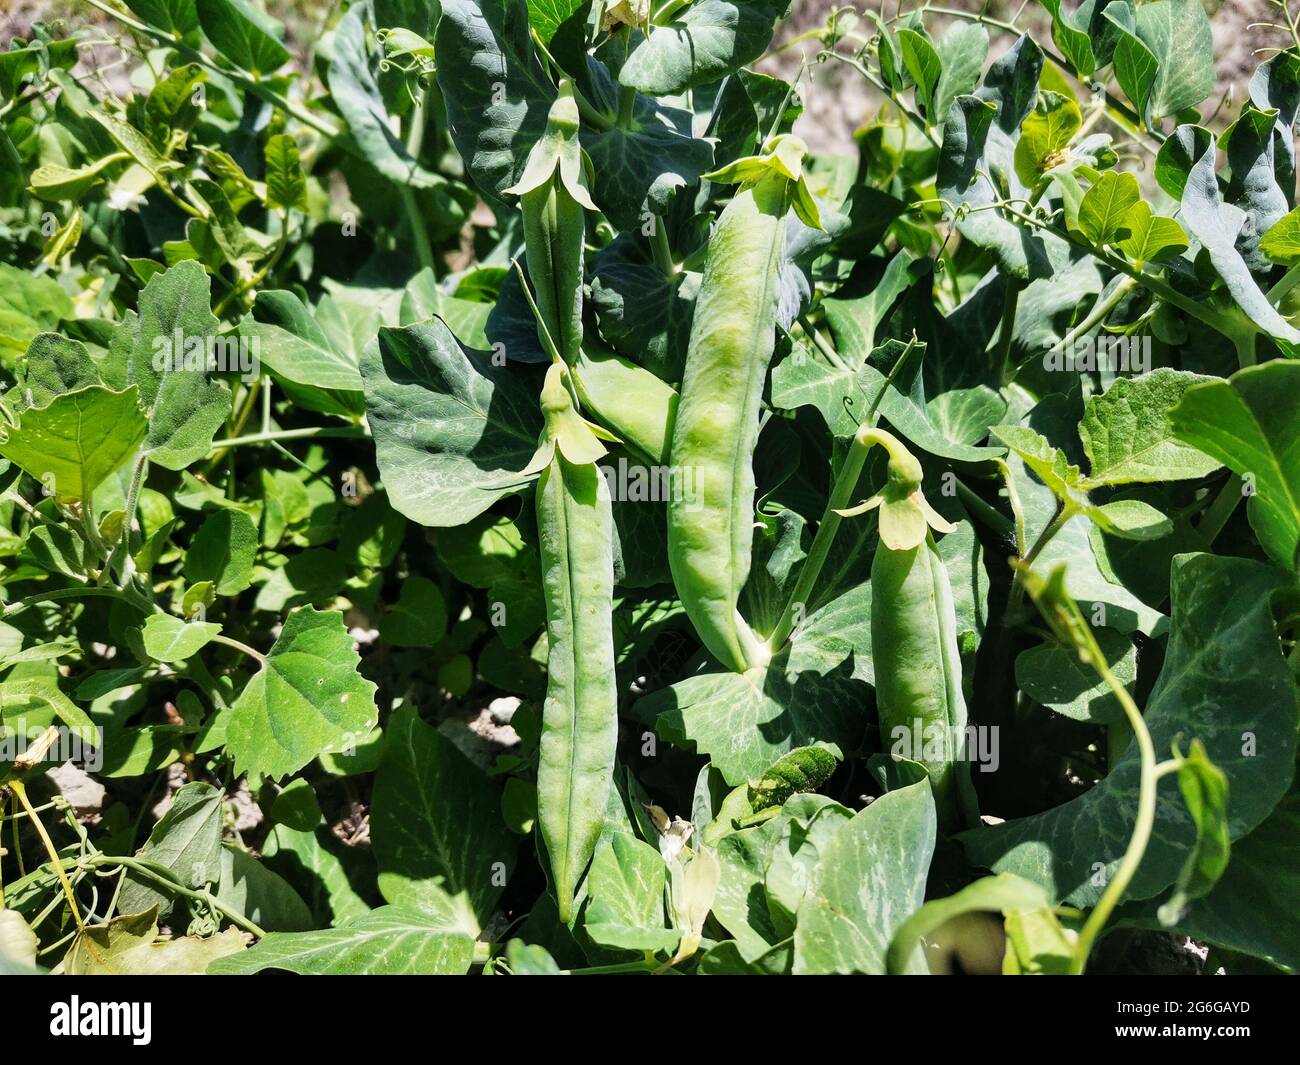 Peas in the garden. Shelled peas and grains. Pea plant and grain. Stock Photo